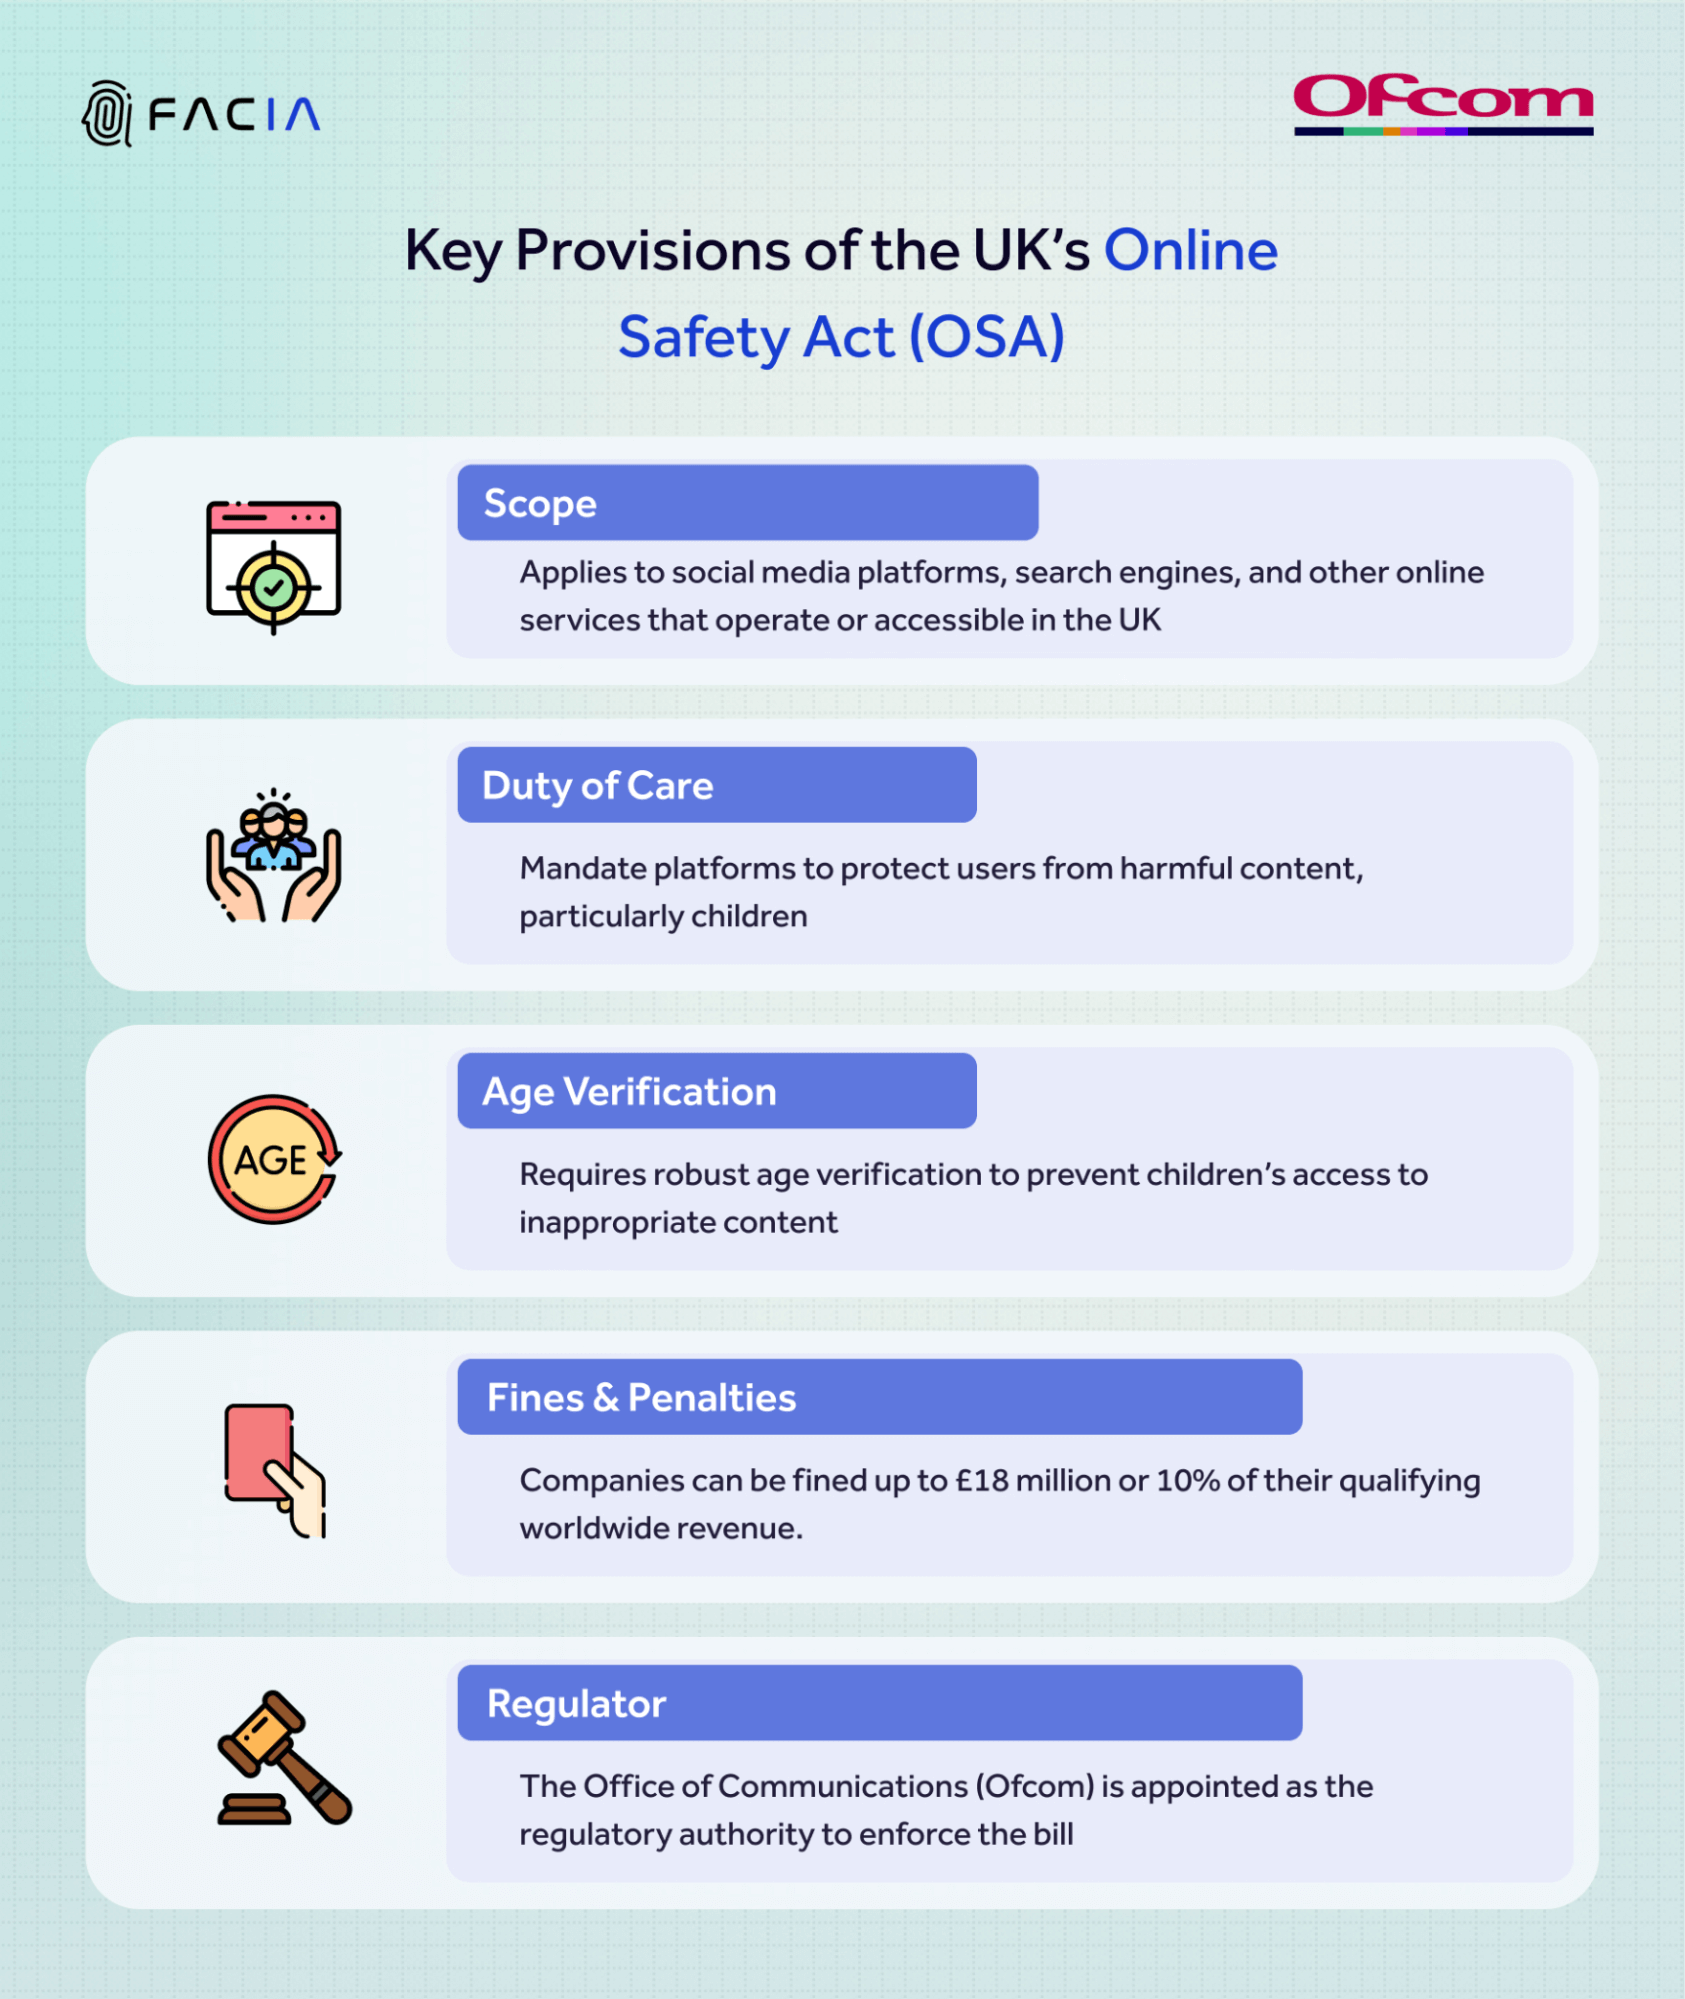 This infographic shows the key provisions of OSA including scope, duty of care, age verification measures, penalties for non-compliance, and regulatory authority.